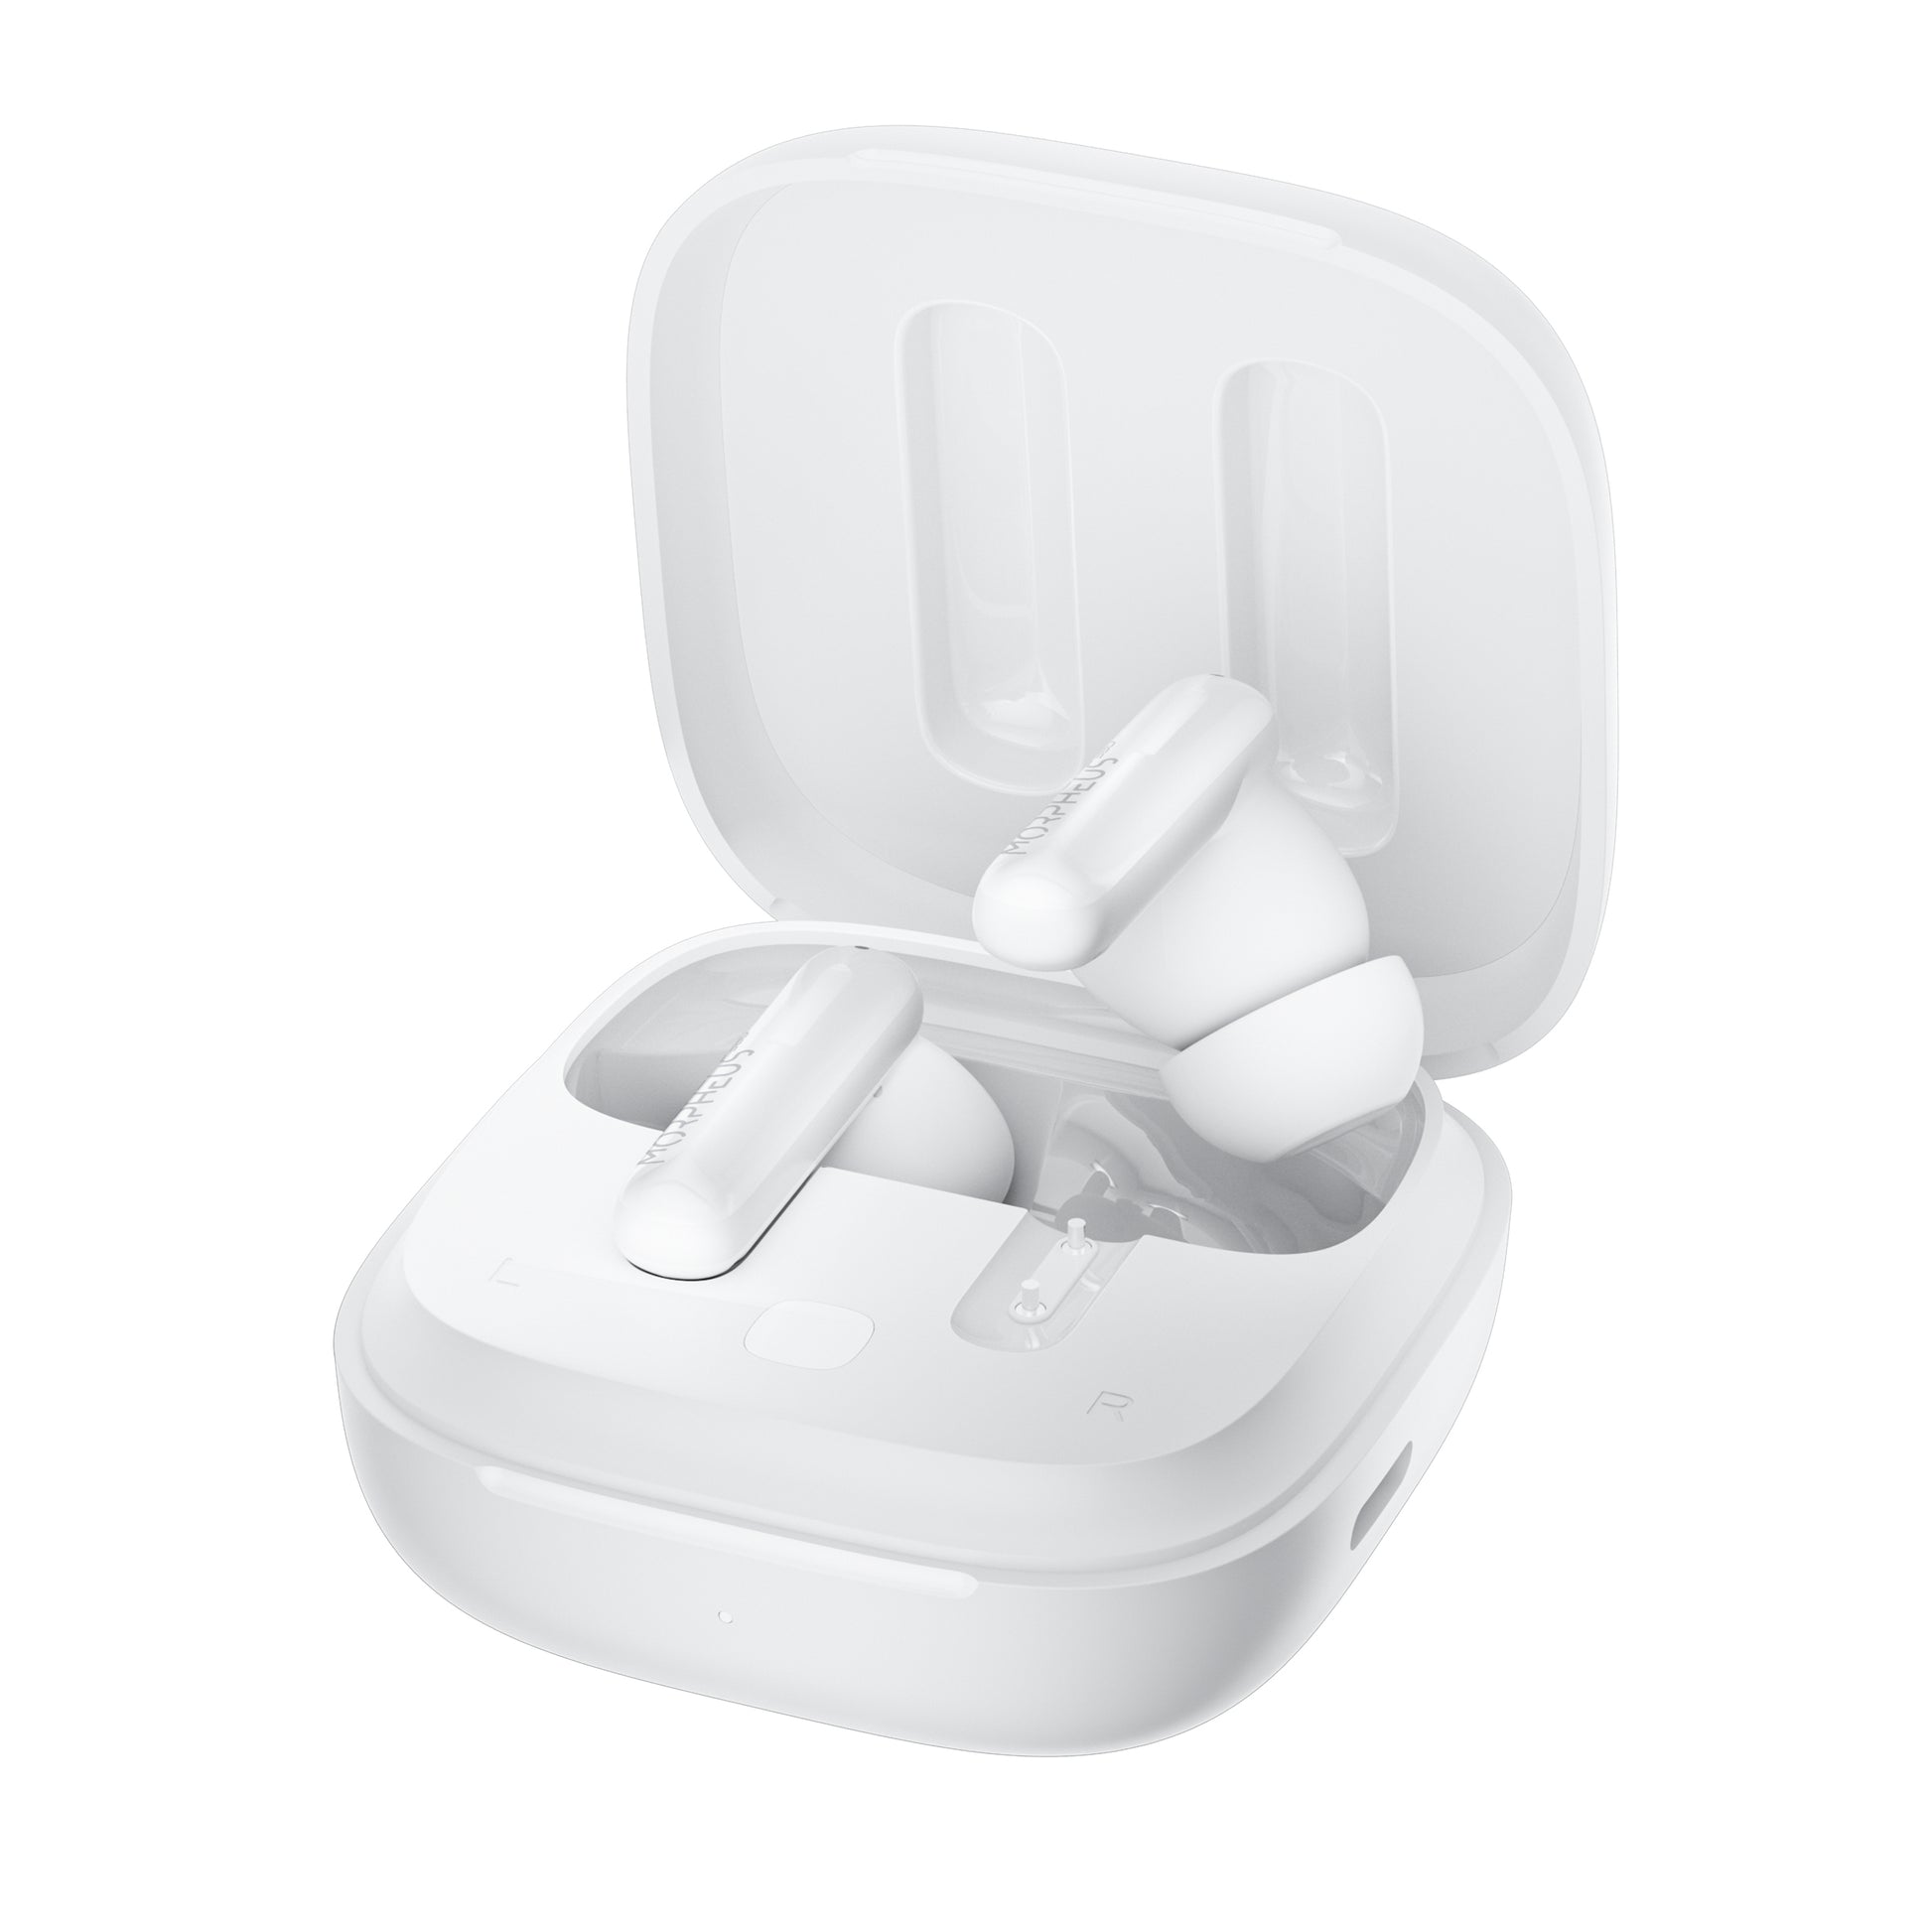 Photo of Morpheus 360 Nemesis ANC True Wireless Earbuds, white left and right stick earbuds with white charging case